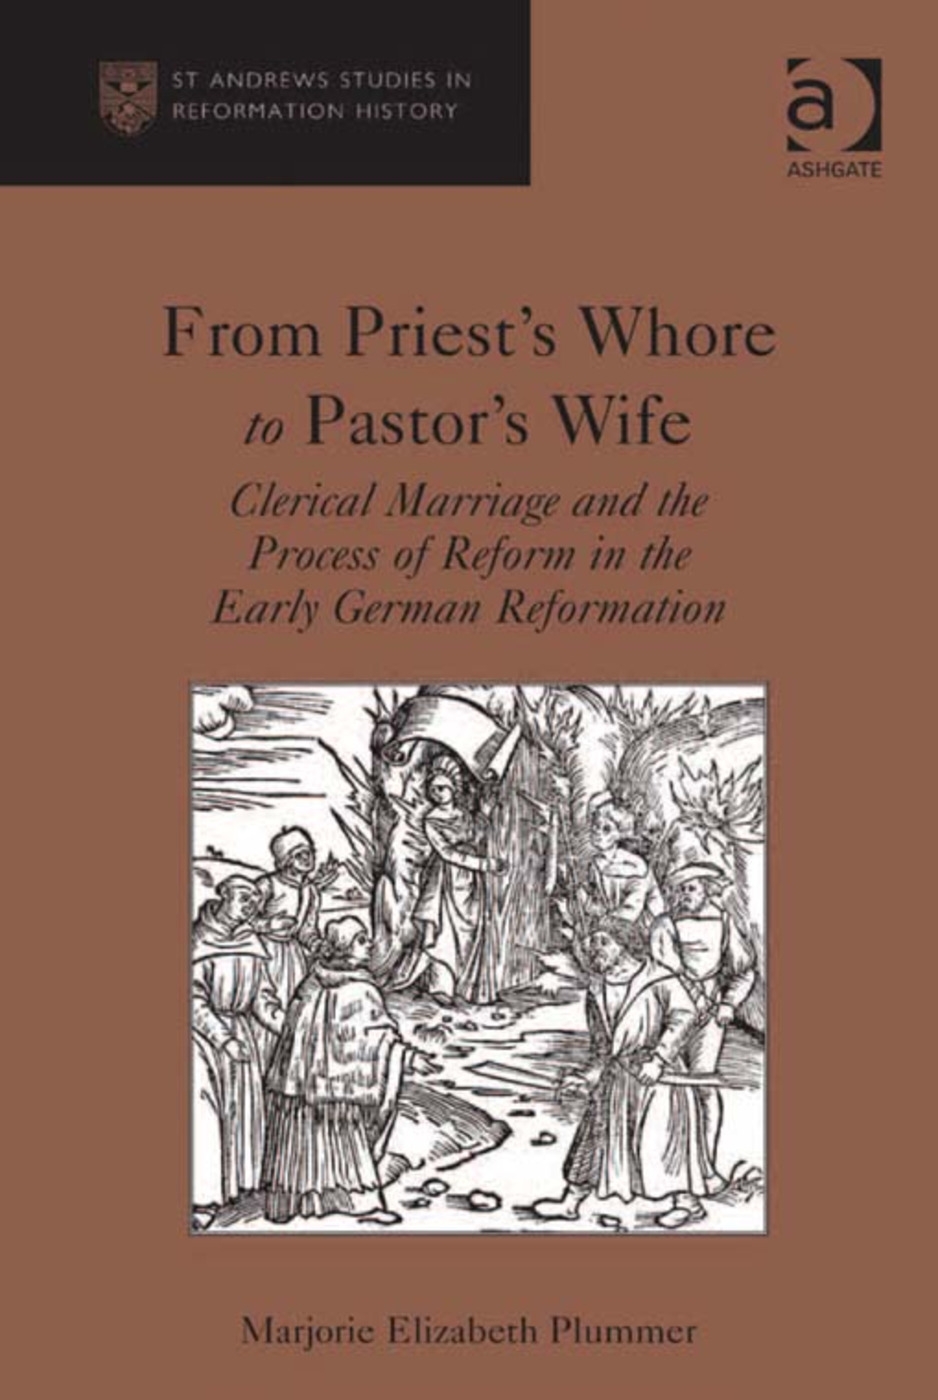 From Priest’s Whore to Pastor’s Wife: Clerical Marriage and the Process of Reform in the Early German Reformation. Marjorie Elizabeth Plummer